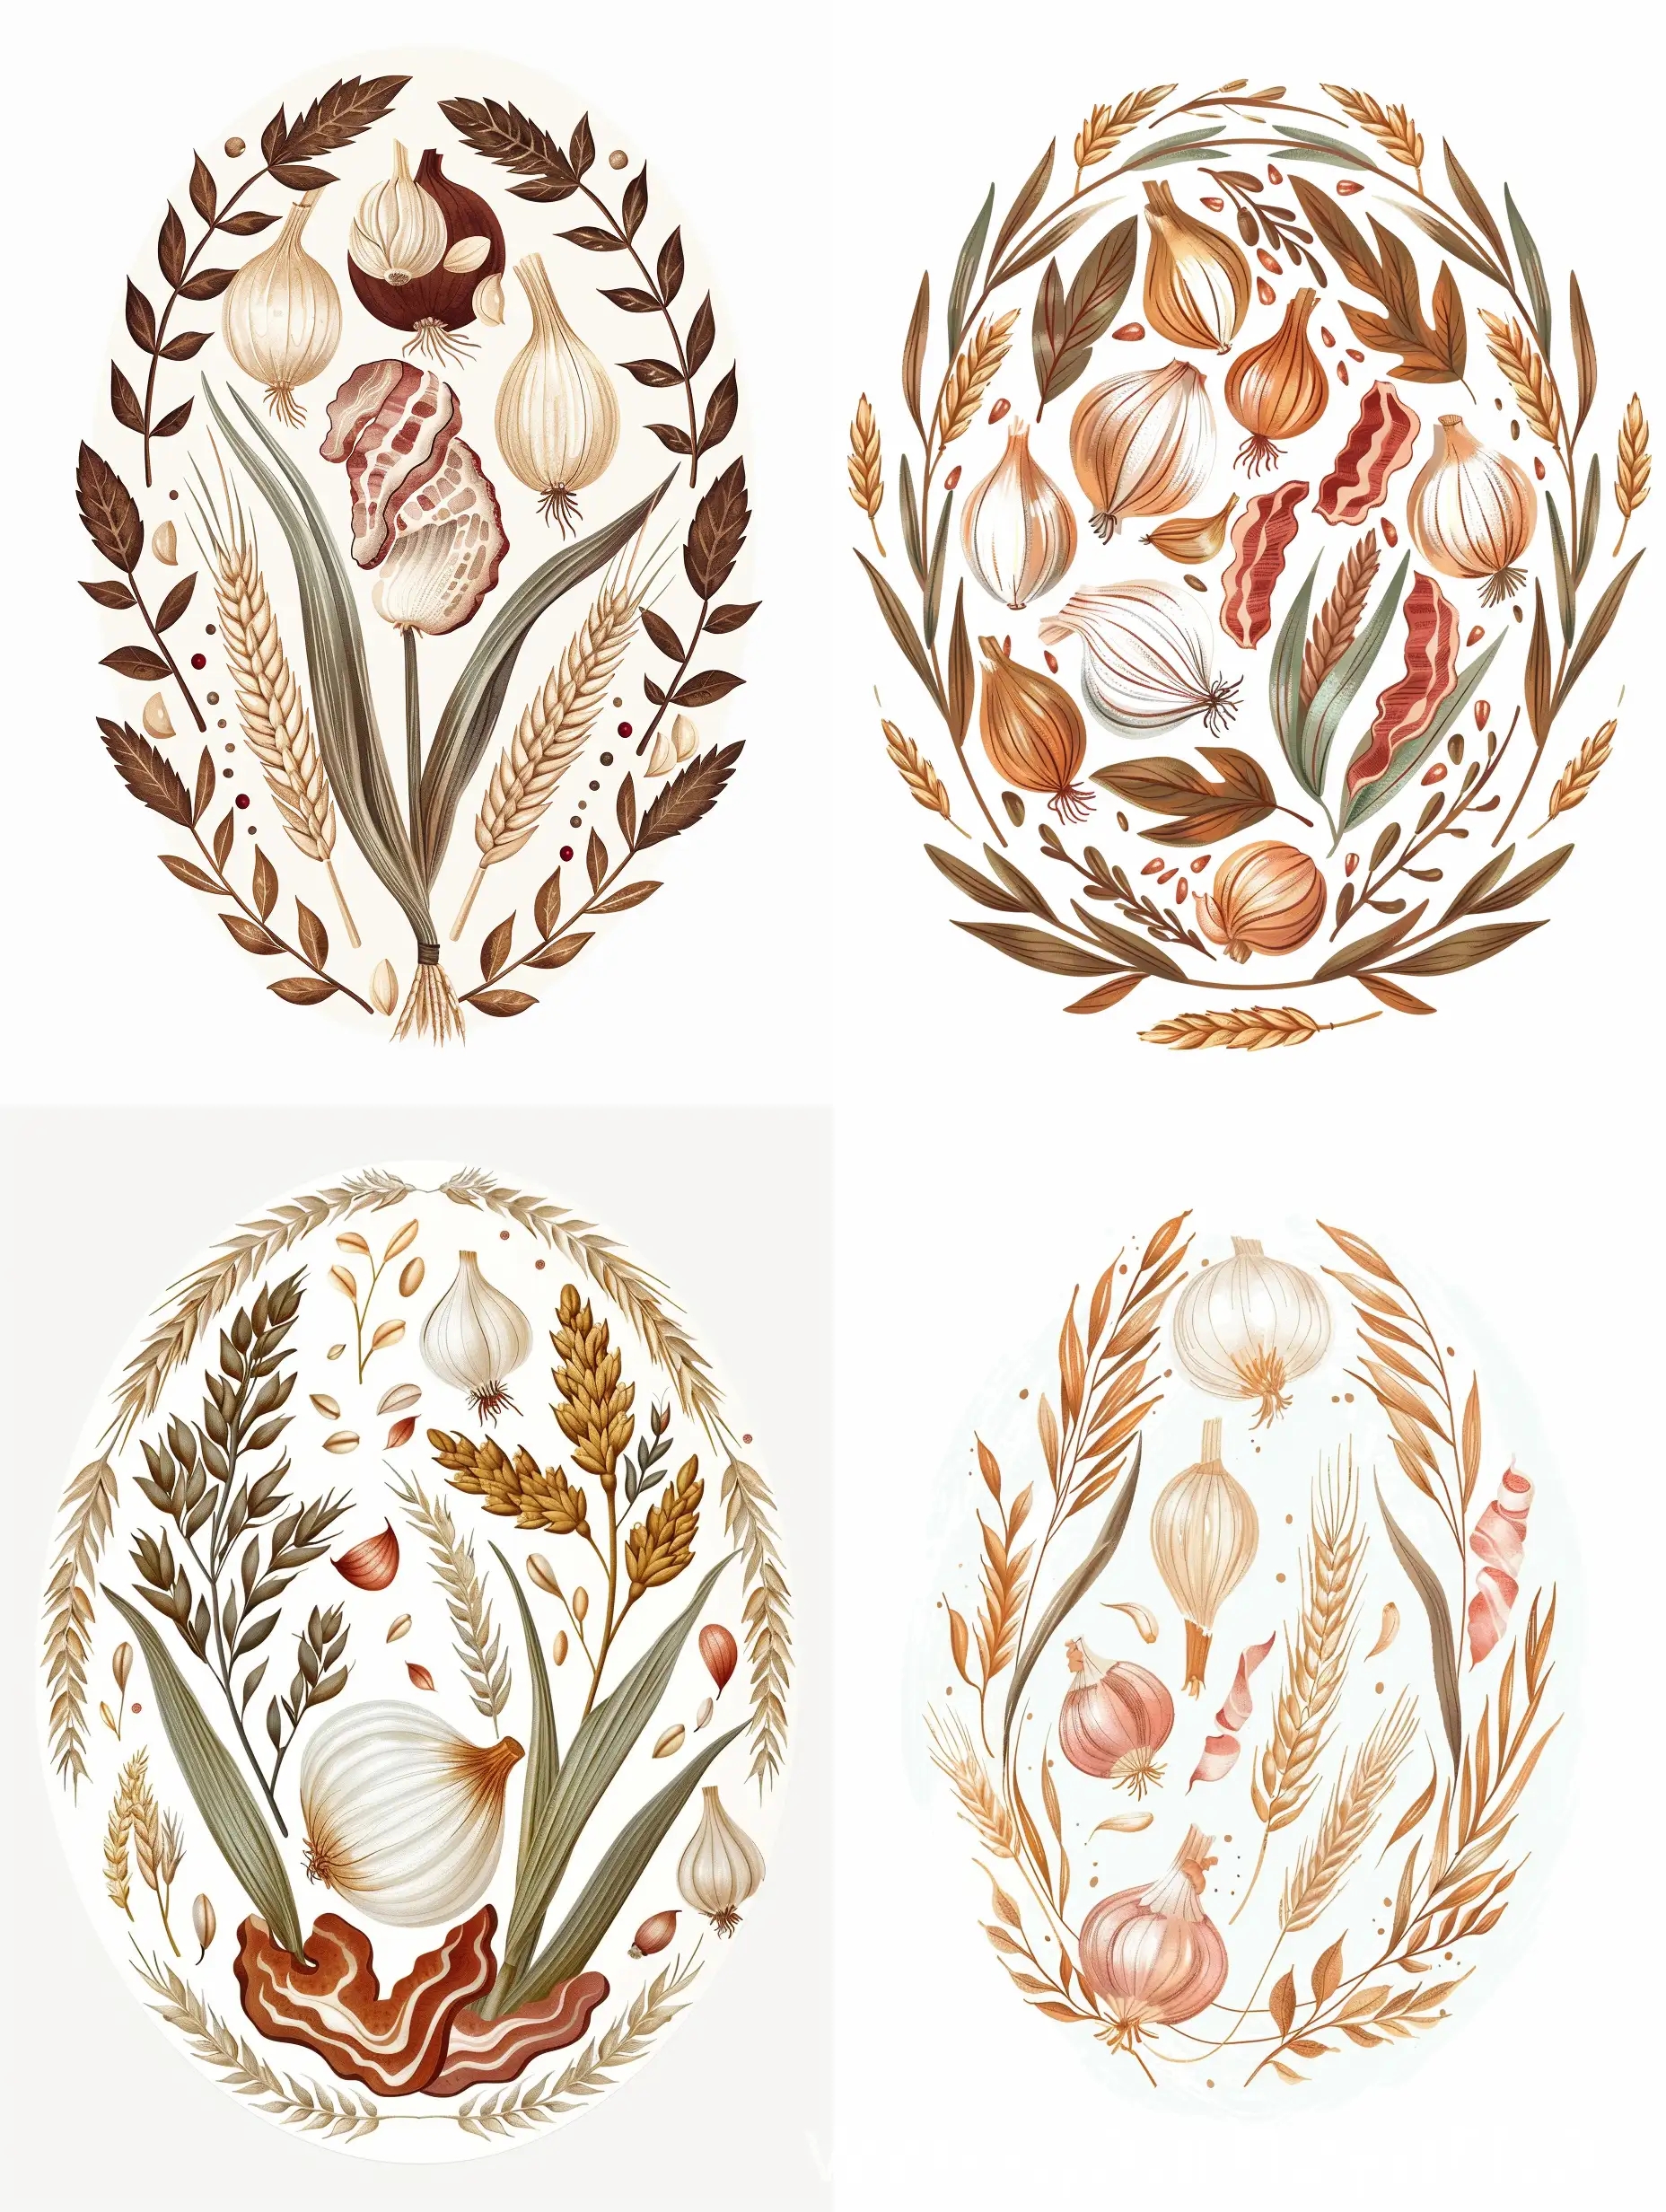 Vintage-Victorian-Style-Oval-Ornament-with-Translucent-Spikelets-and-Wheat-Leaves-on-White-Background